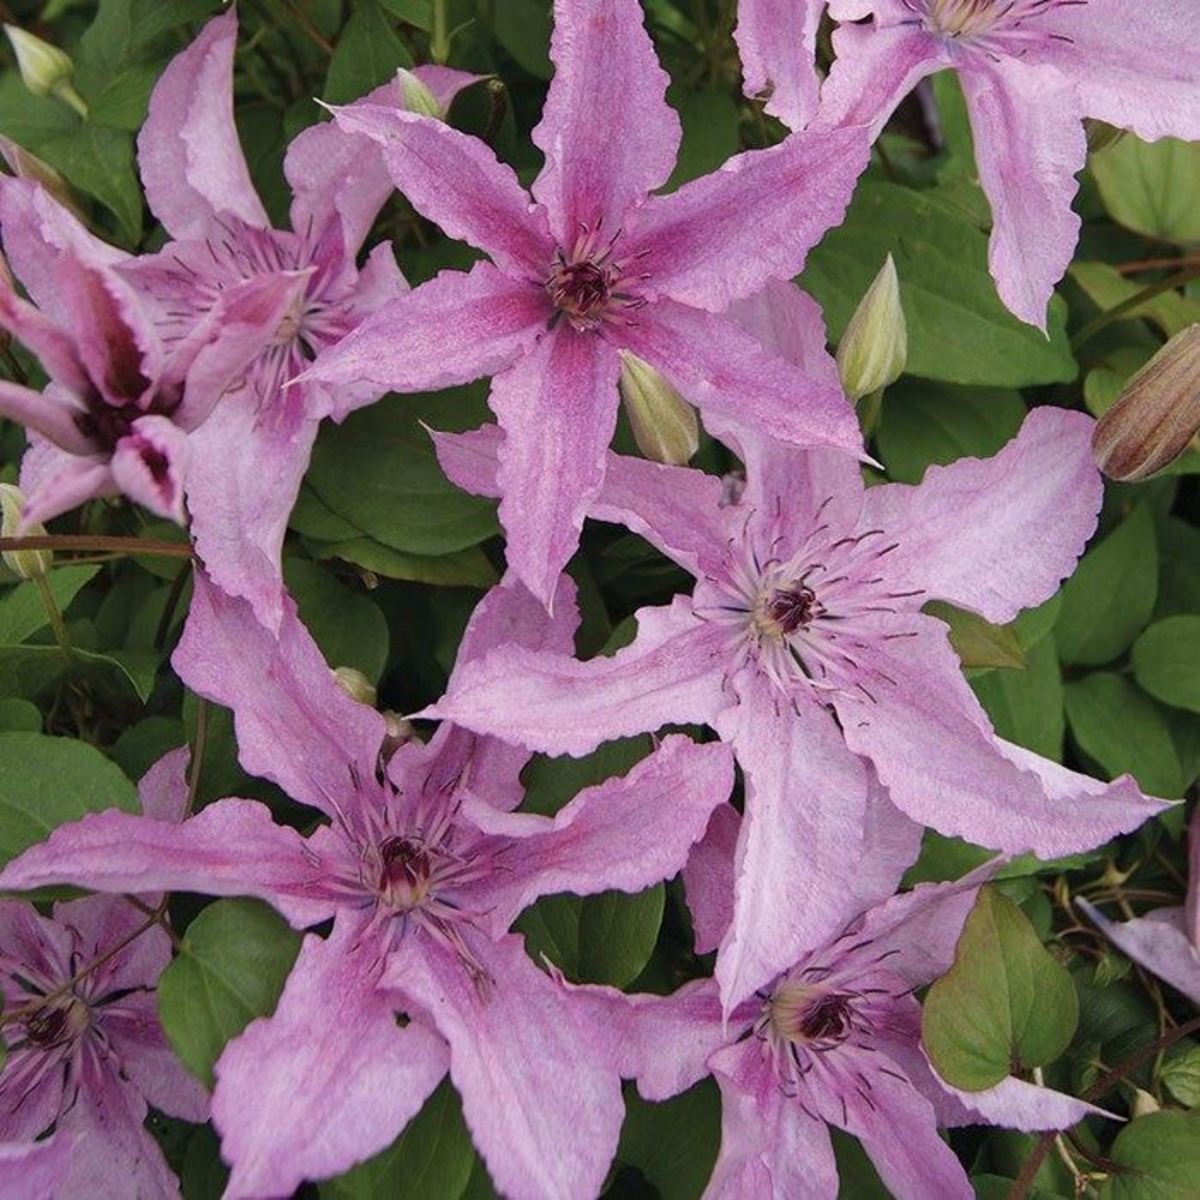 Clematis Hagley Hybrid has large, speckled, subtle shell-pink to mauve flowers that become lighter as they age.  You can grow this clematis in the ground or in a container.